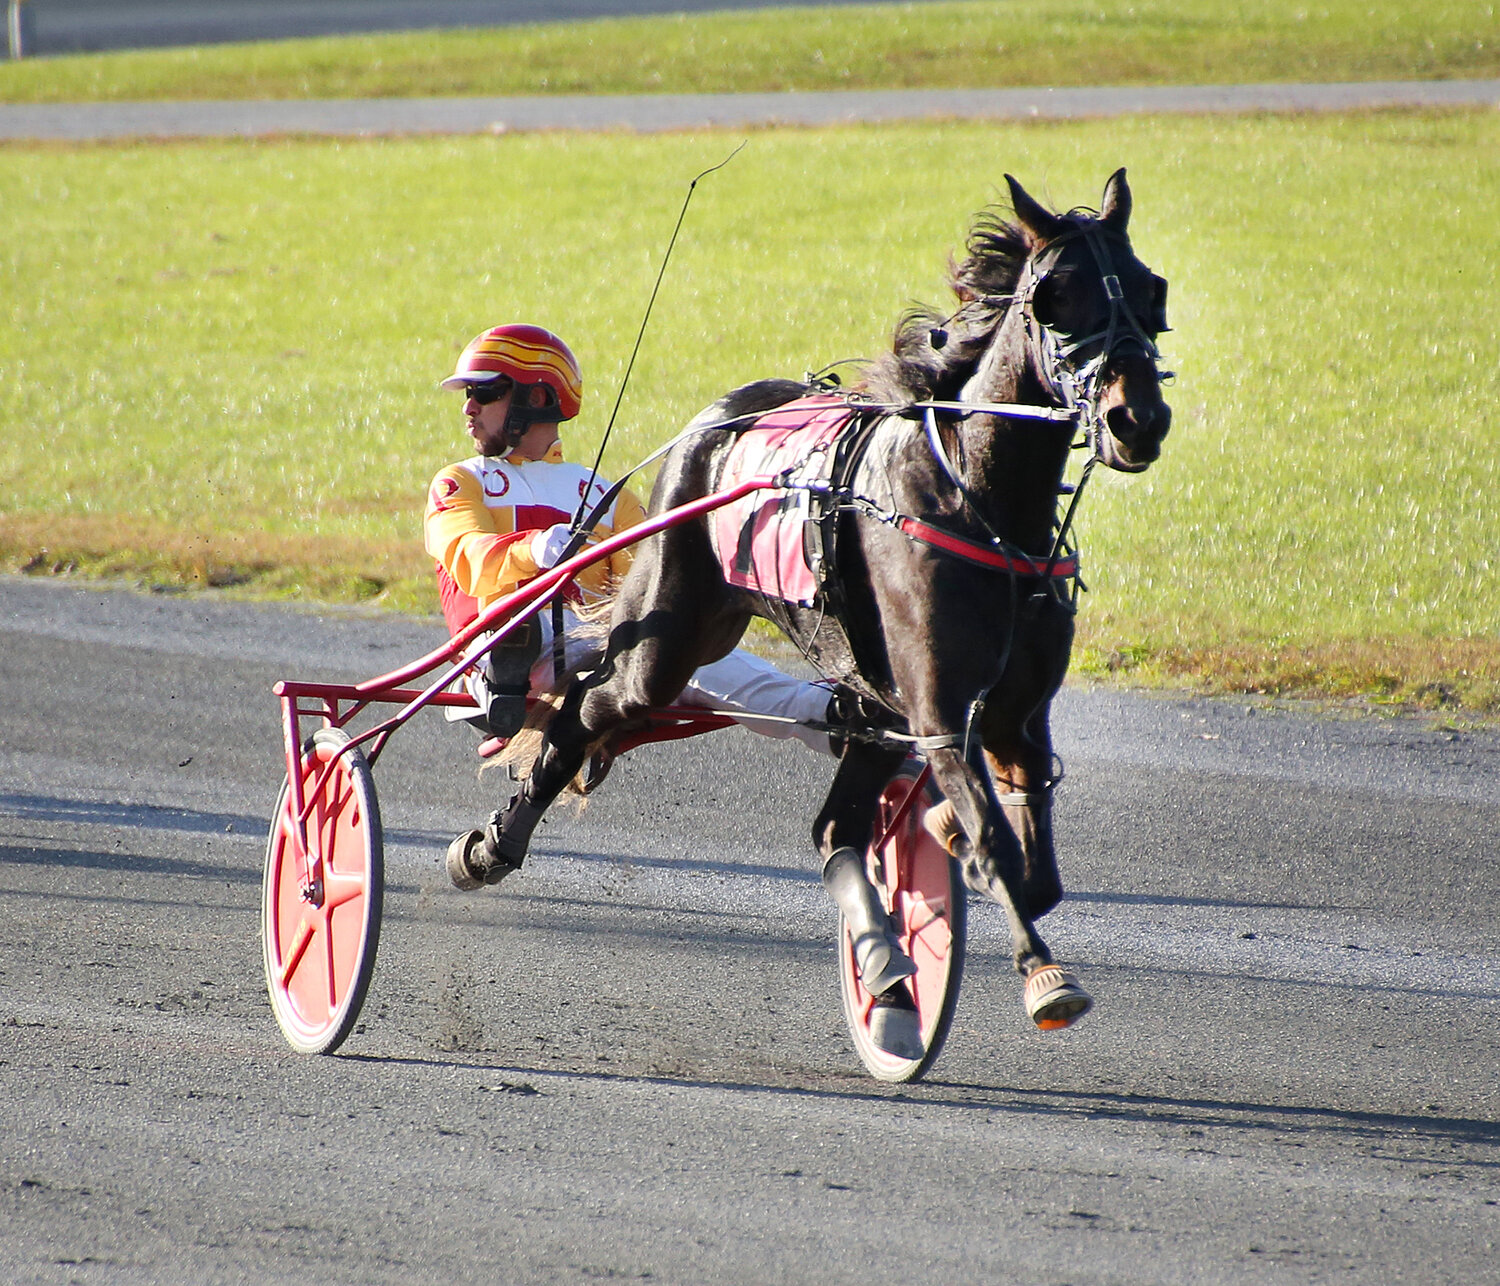 Trotter Starlight Lounge, driven by Cody Poliseno, cruises to a win in 2:01 in the first race Wednesday  night at Harrington Raceway.